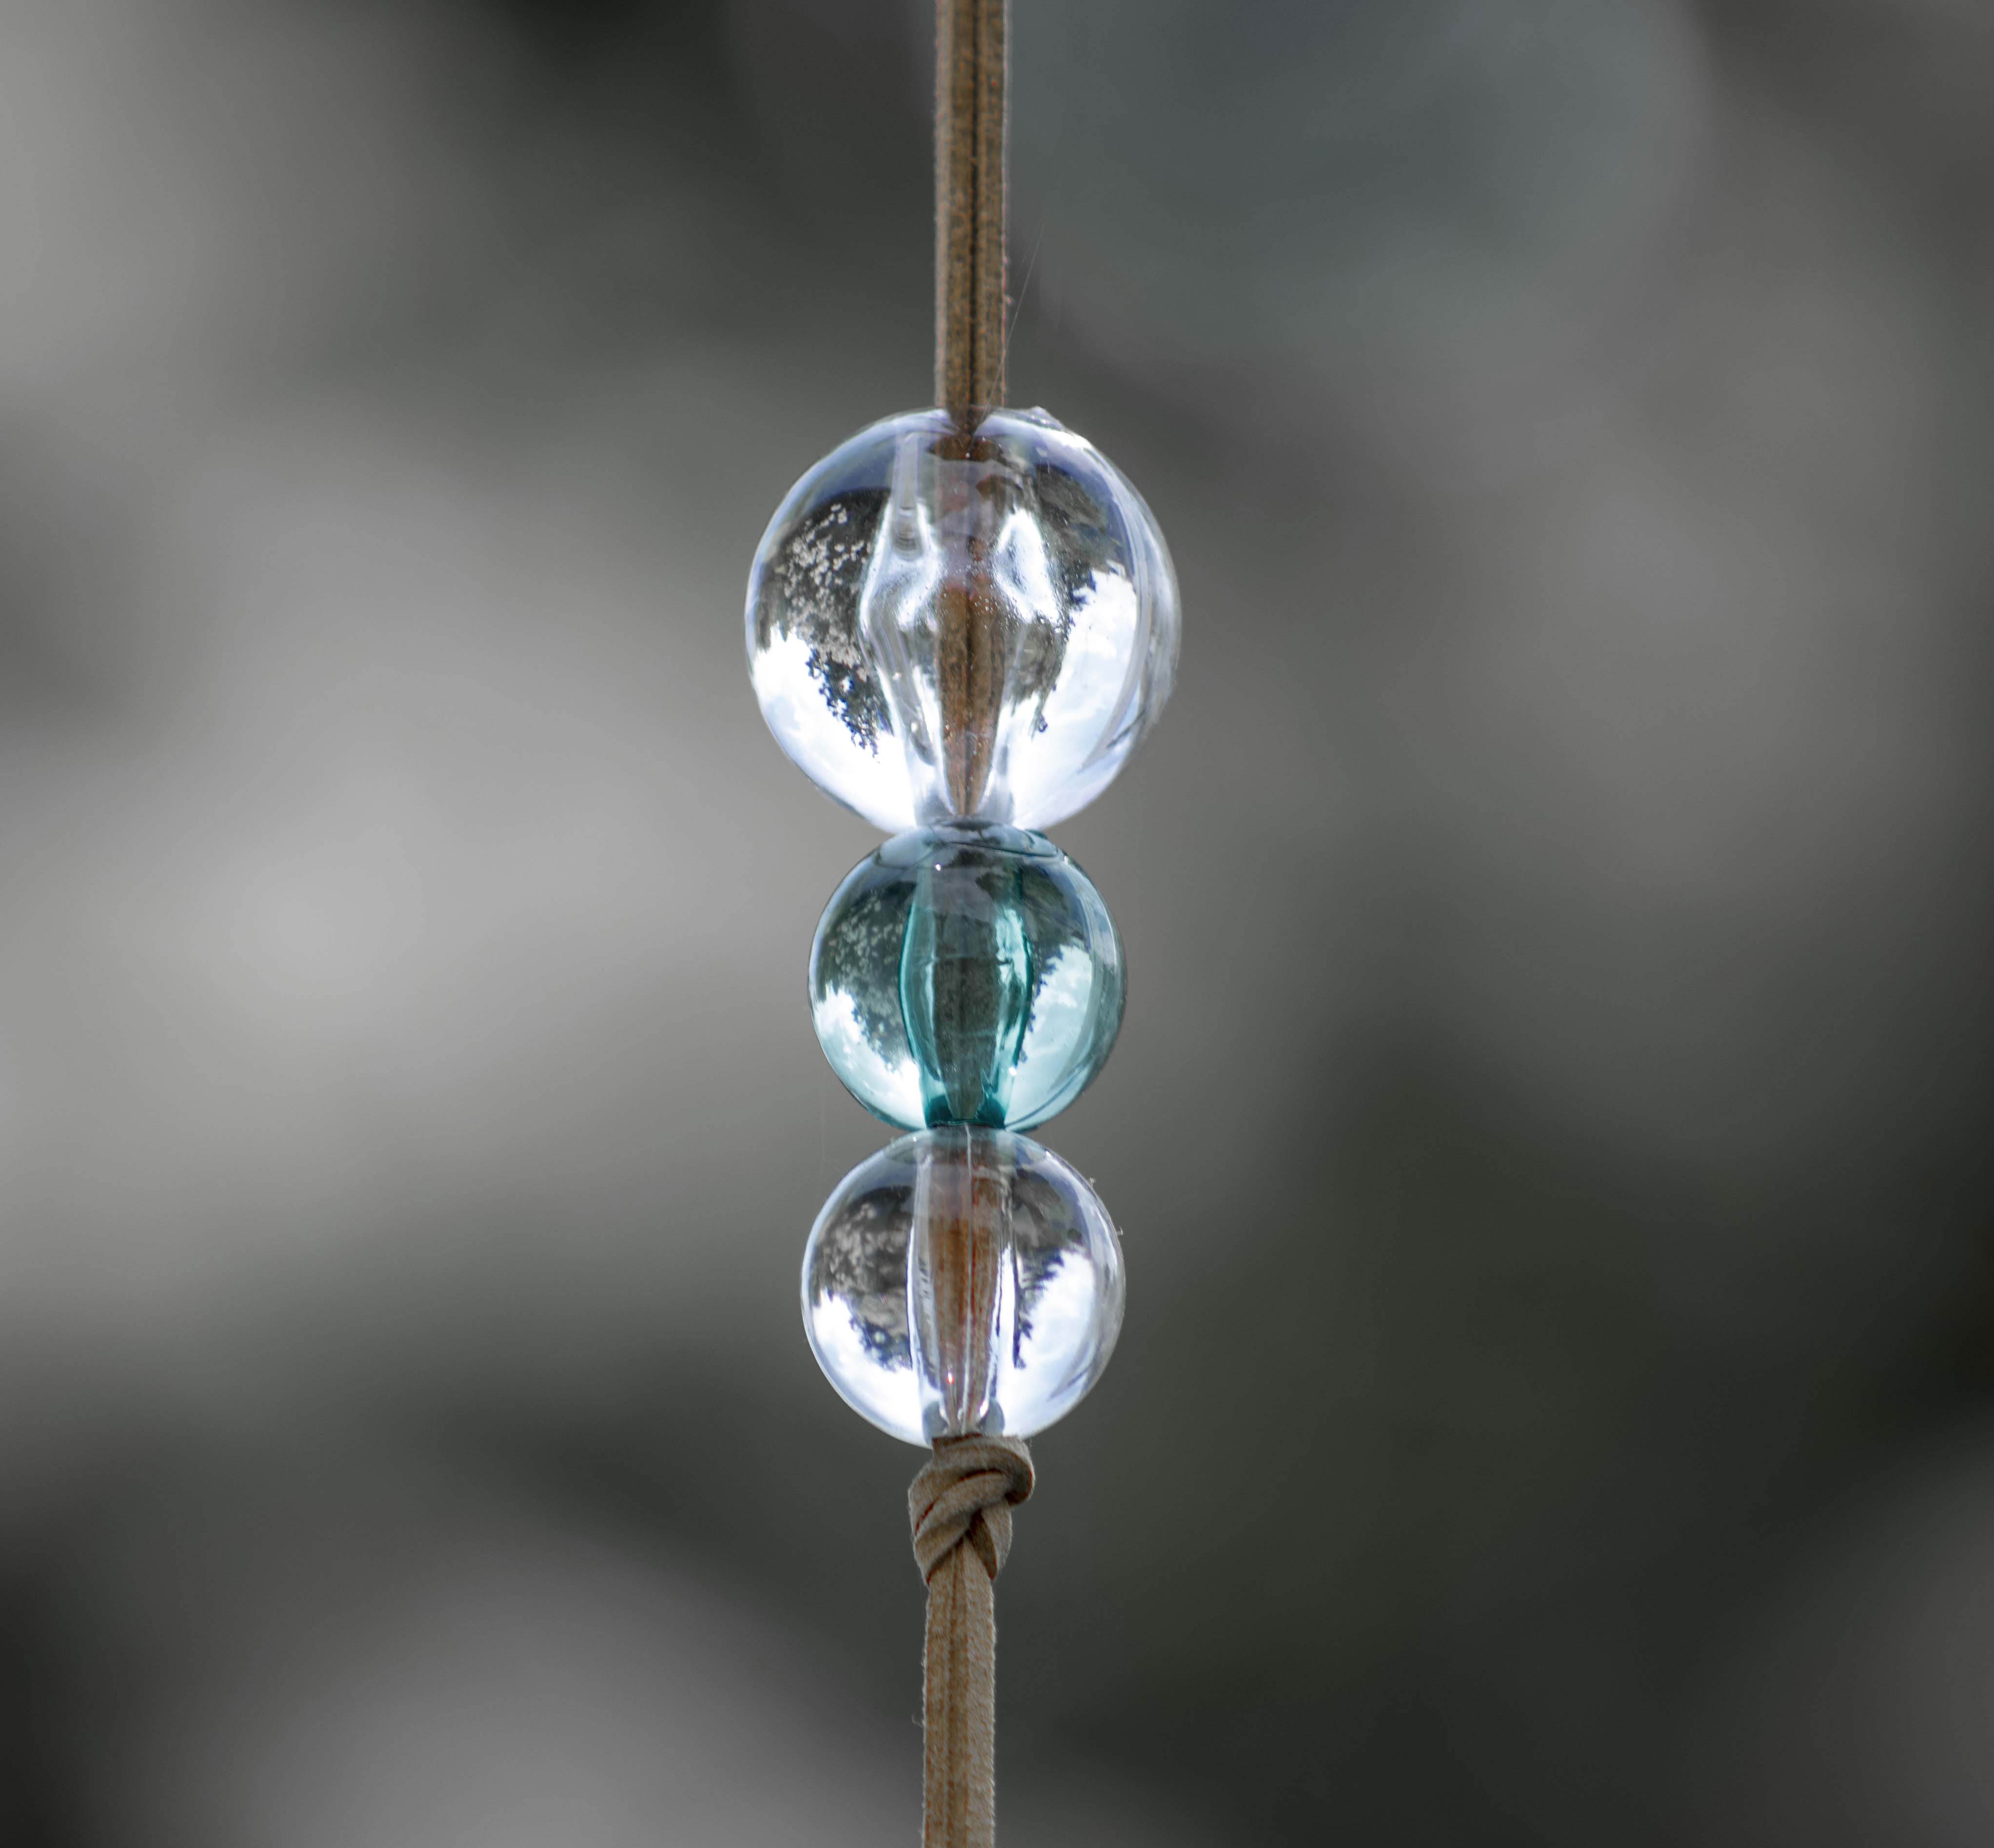 Glass Balls From A Wind Chime.jpg